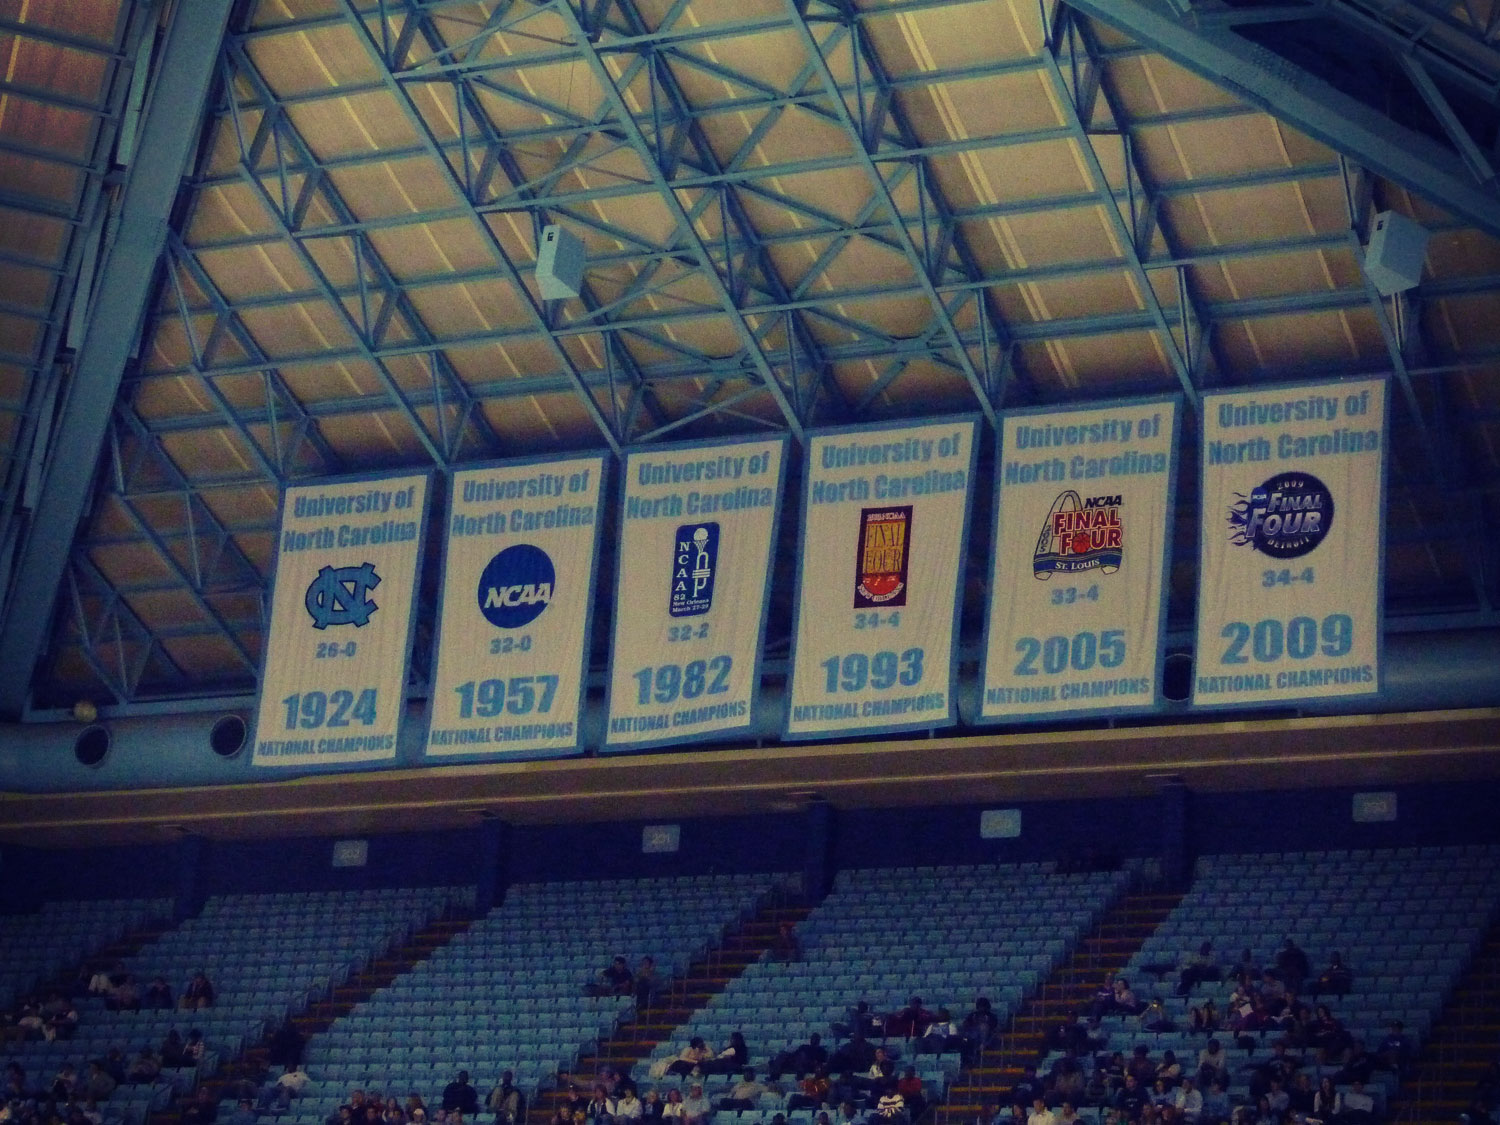 UNC banners